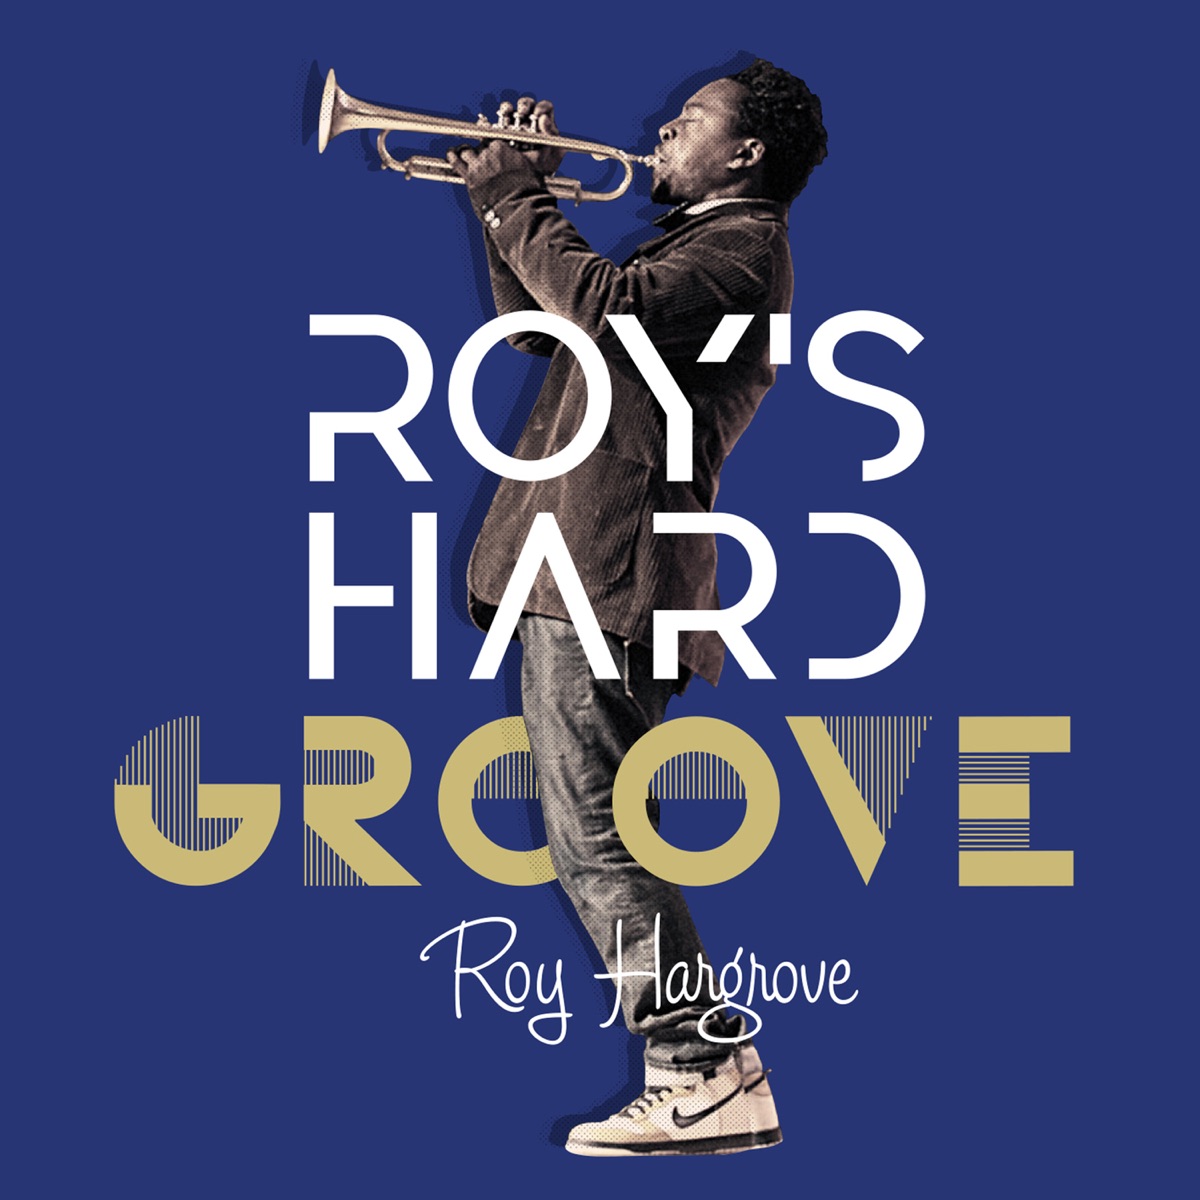 Roy's Hard Groove   Album by Roy Hargrove   Apple Music